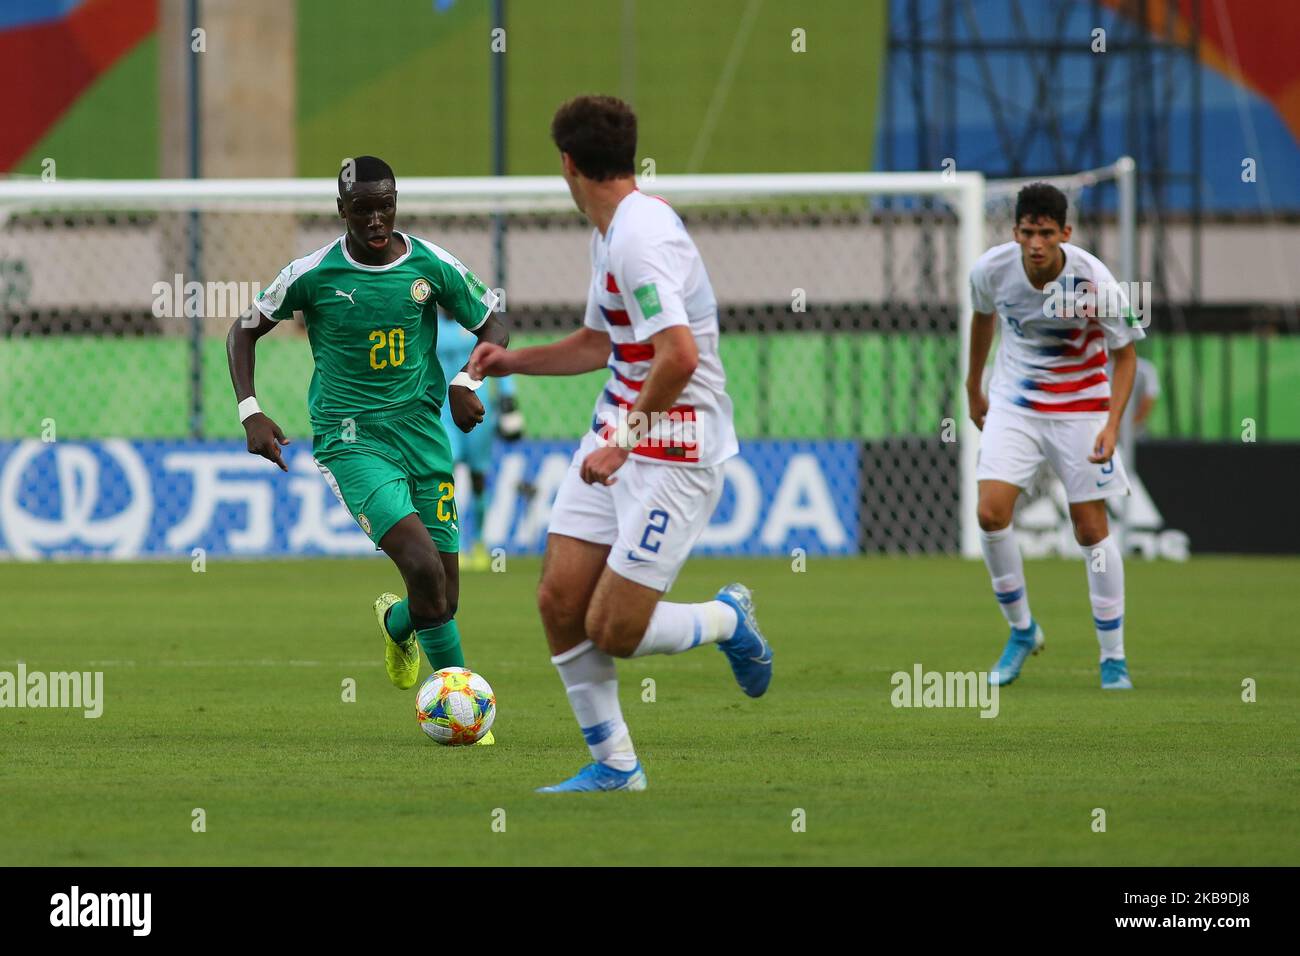 Ibrahima Sy of Senegal controls the ball during the Group D Match between USA and Senegal in the FIFA U-17 World Cup Brazil 2019 at Estadio Kleber Andrade on October 27, 2019 in Vitoria, Brazil. (Photo by Gilson Borba/NurPhoto) Stock Photo